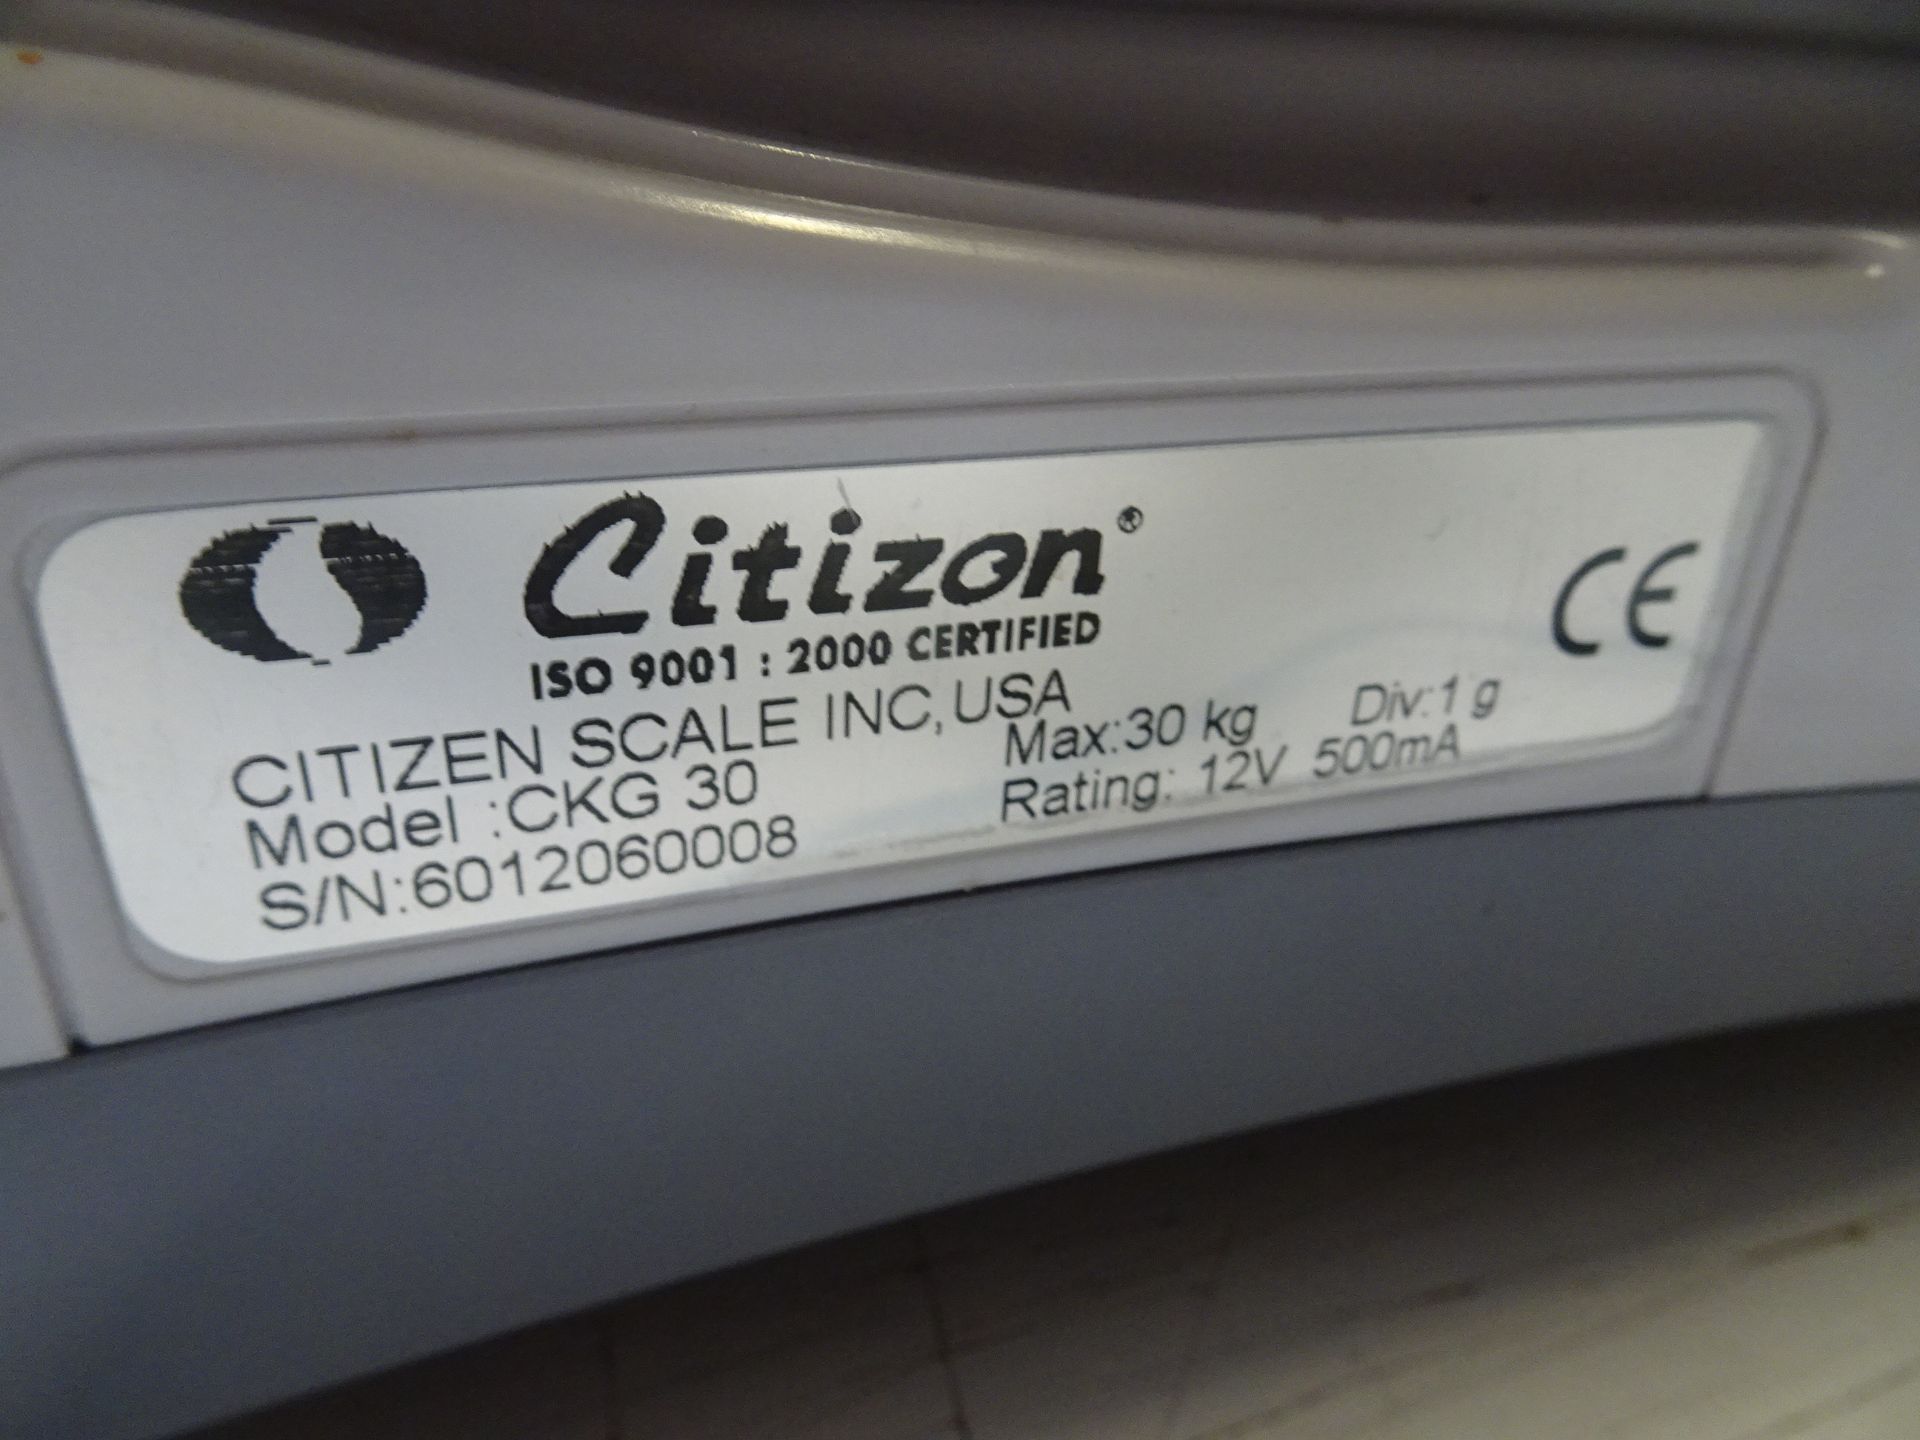 Citizen Model CKG-30 Weight/Counting Scale - Image 2 of 2